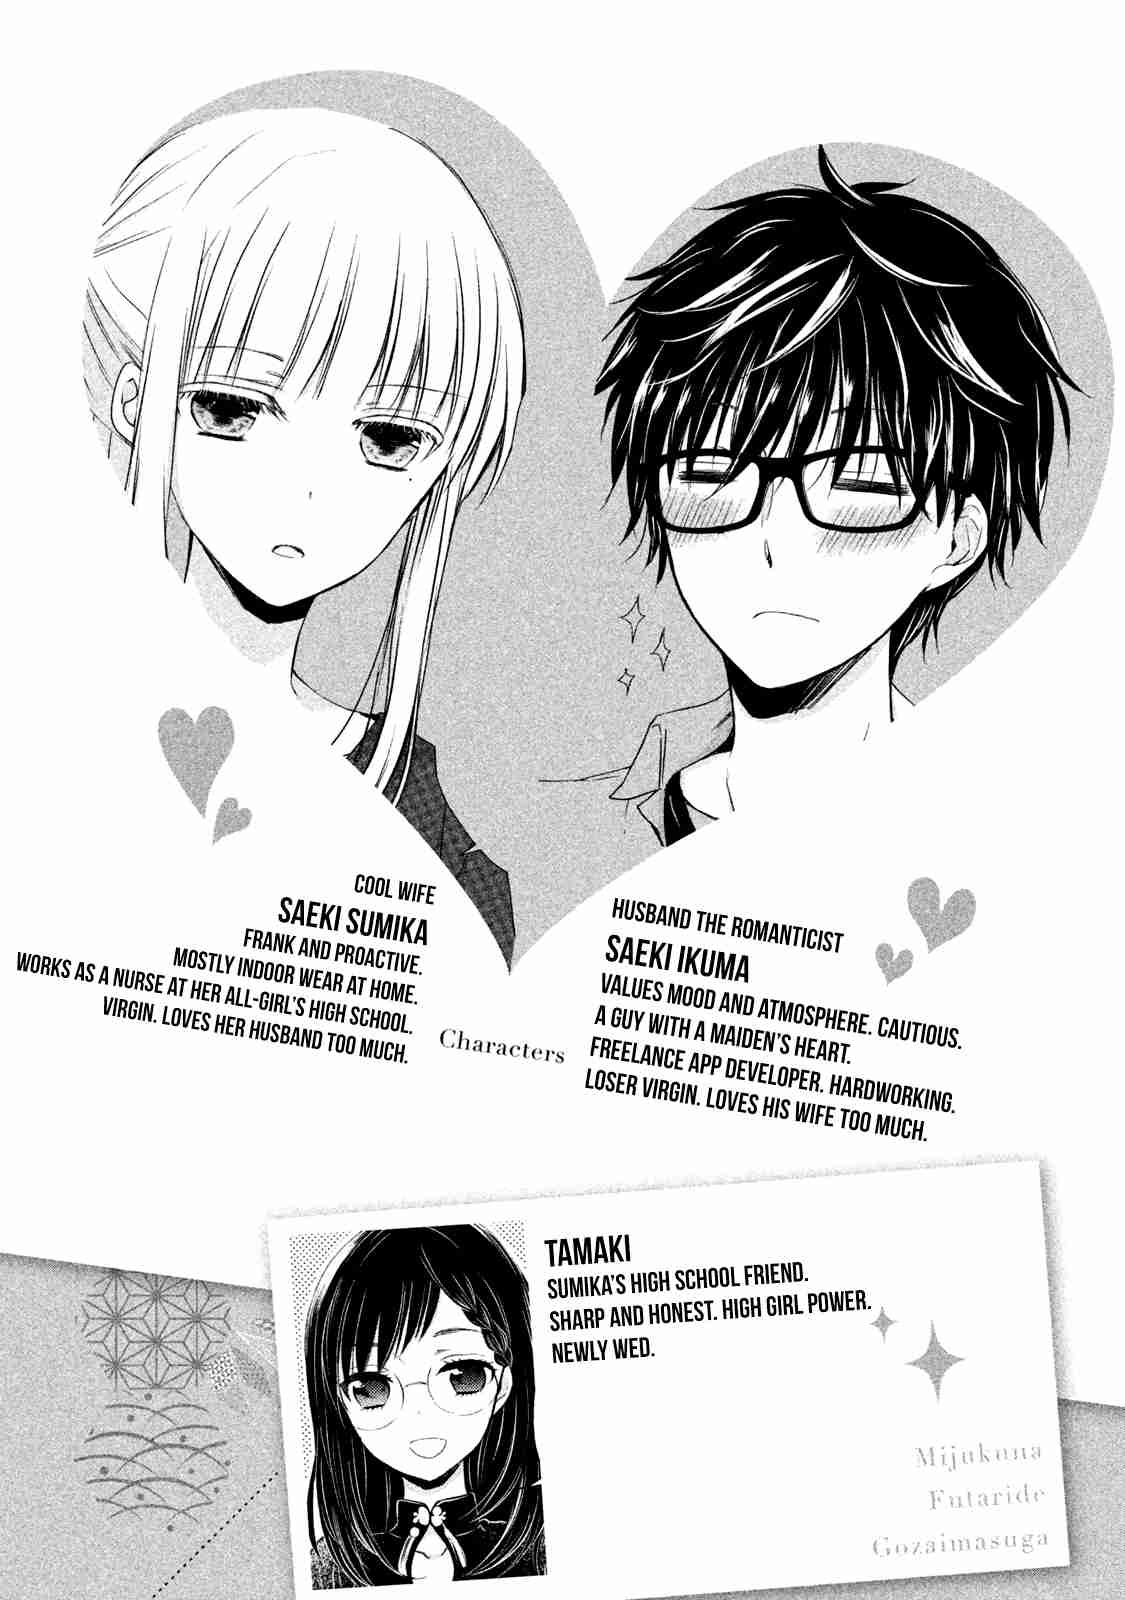 We May Be An Inexperienced Couple But... Vol. 3 Ch. 18 Early Morning Date